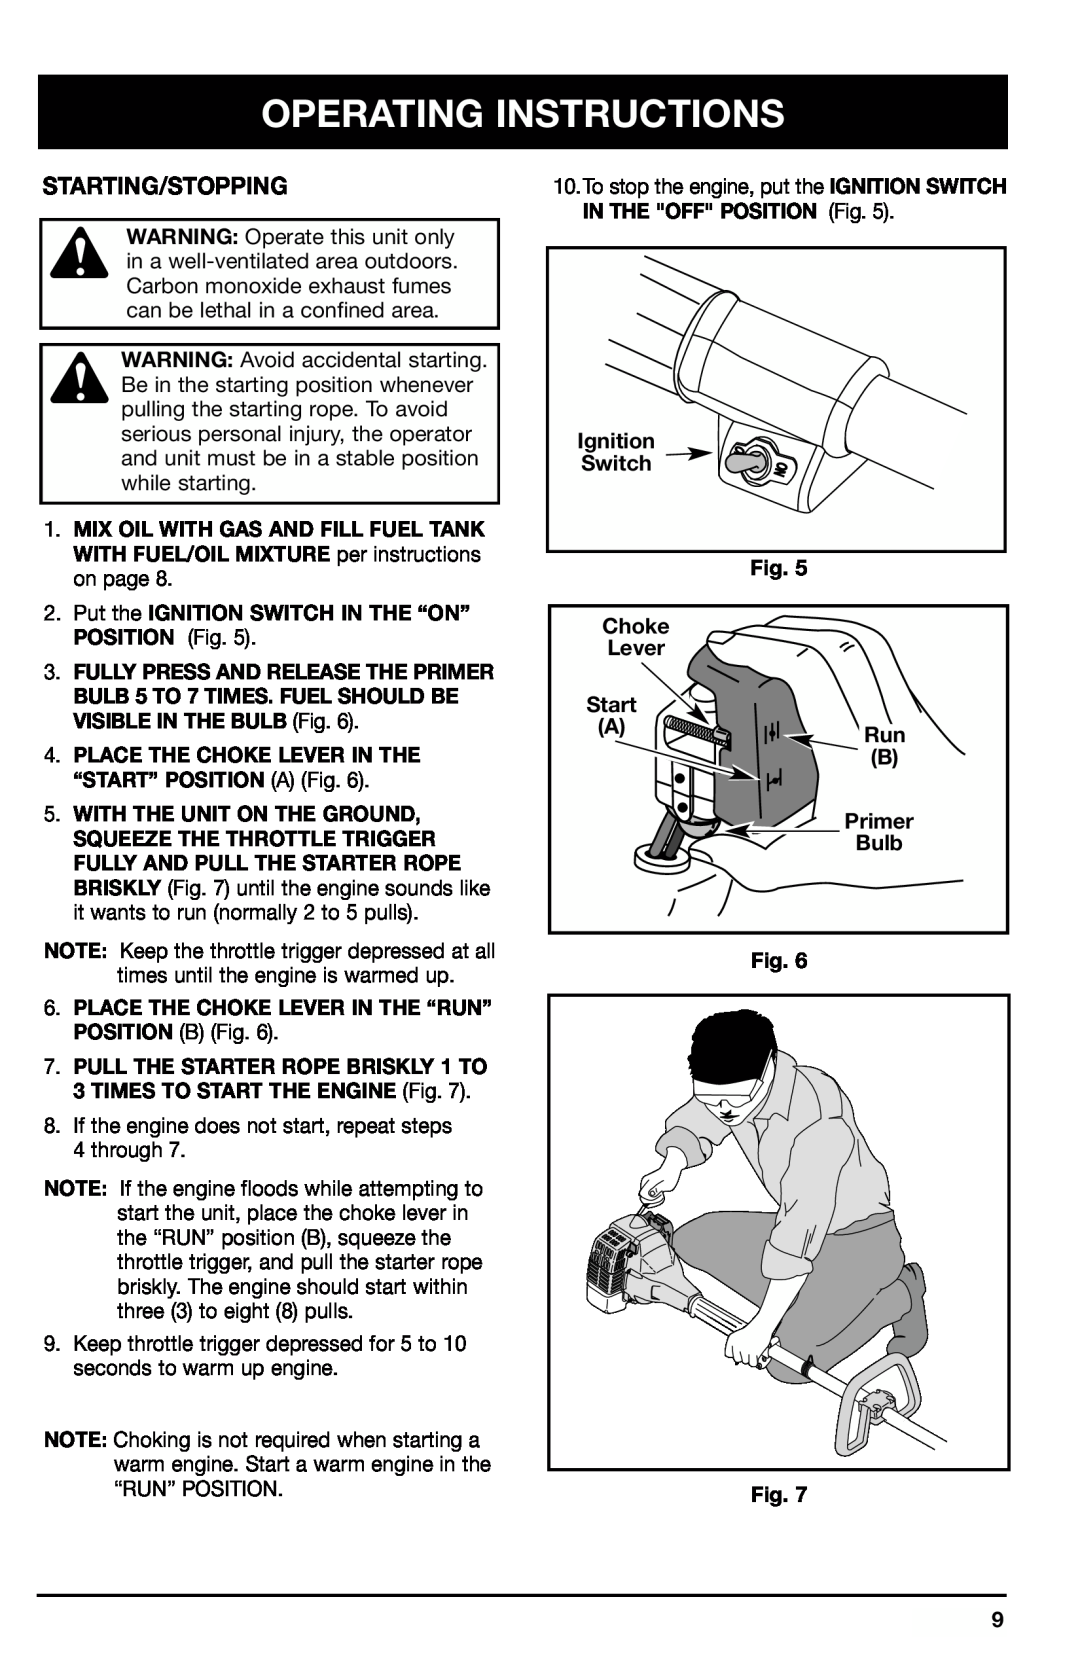 Ryobi 2075r Operating Instructions, Starting/Stopping, Put the IGNITION SWITCH IN THE “ON” POSITION Fig, Ignition, Switch 